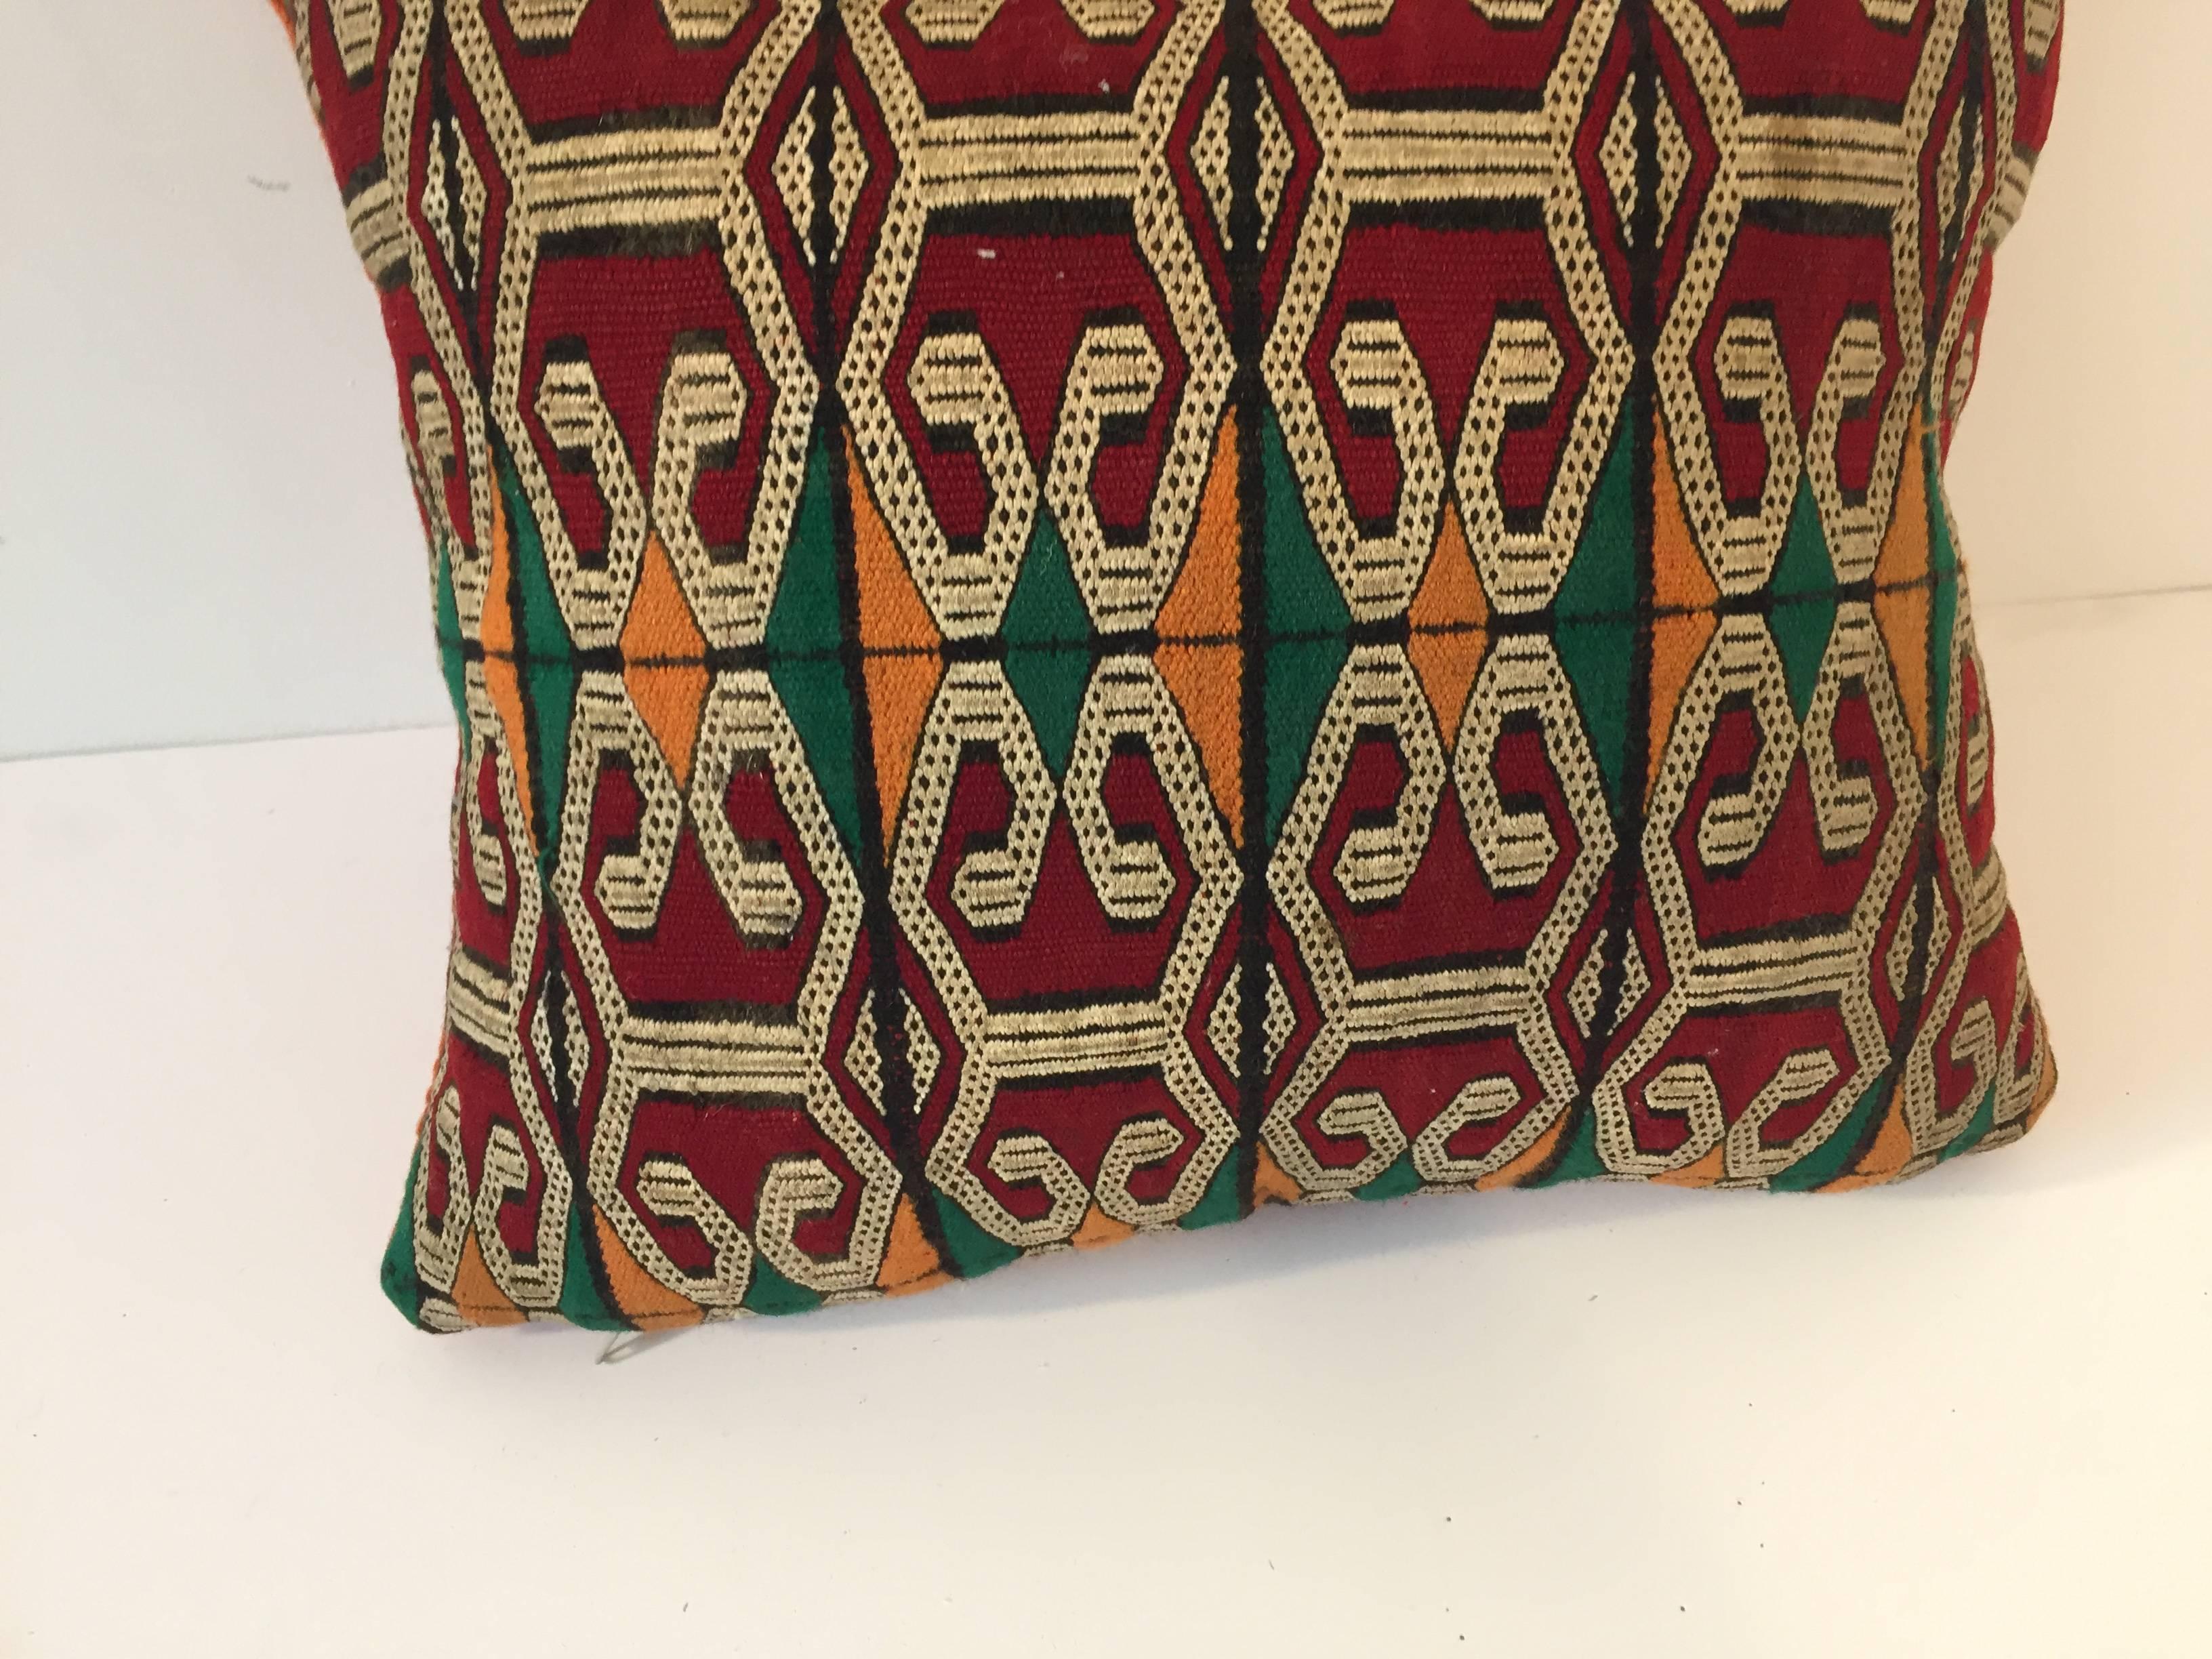 Hand-Woven Moroccan Handwoven Pillow with Tribal African Designs